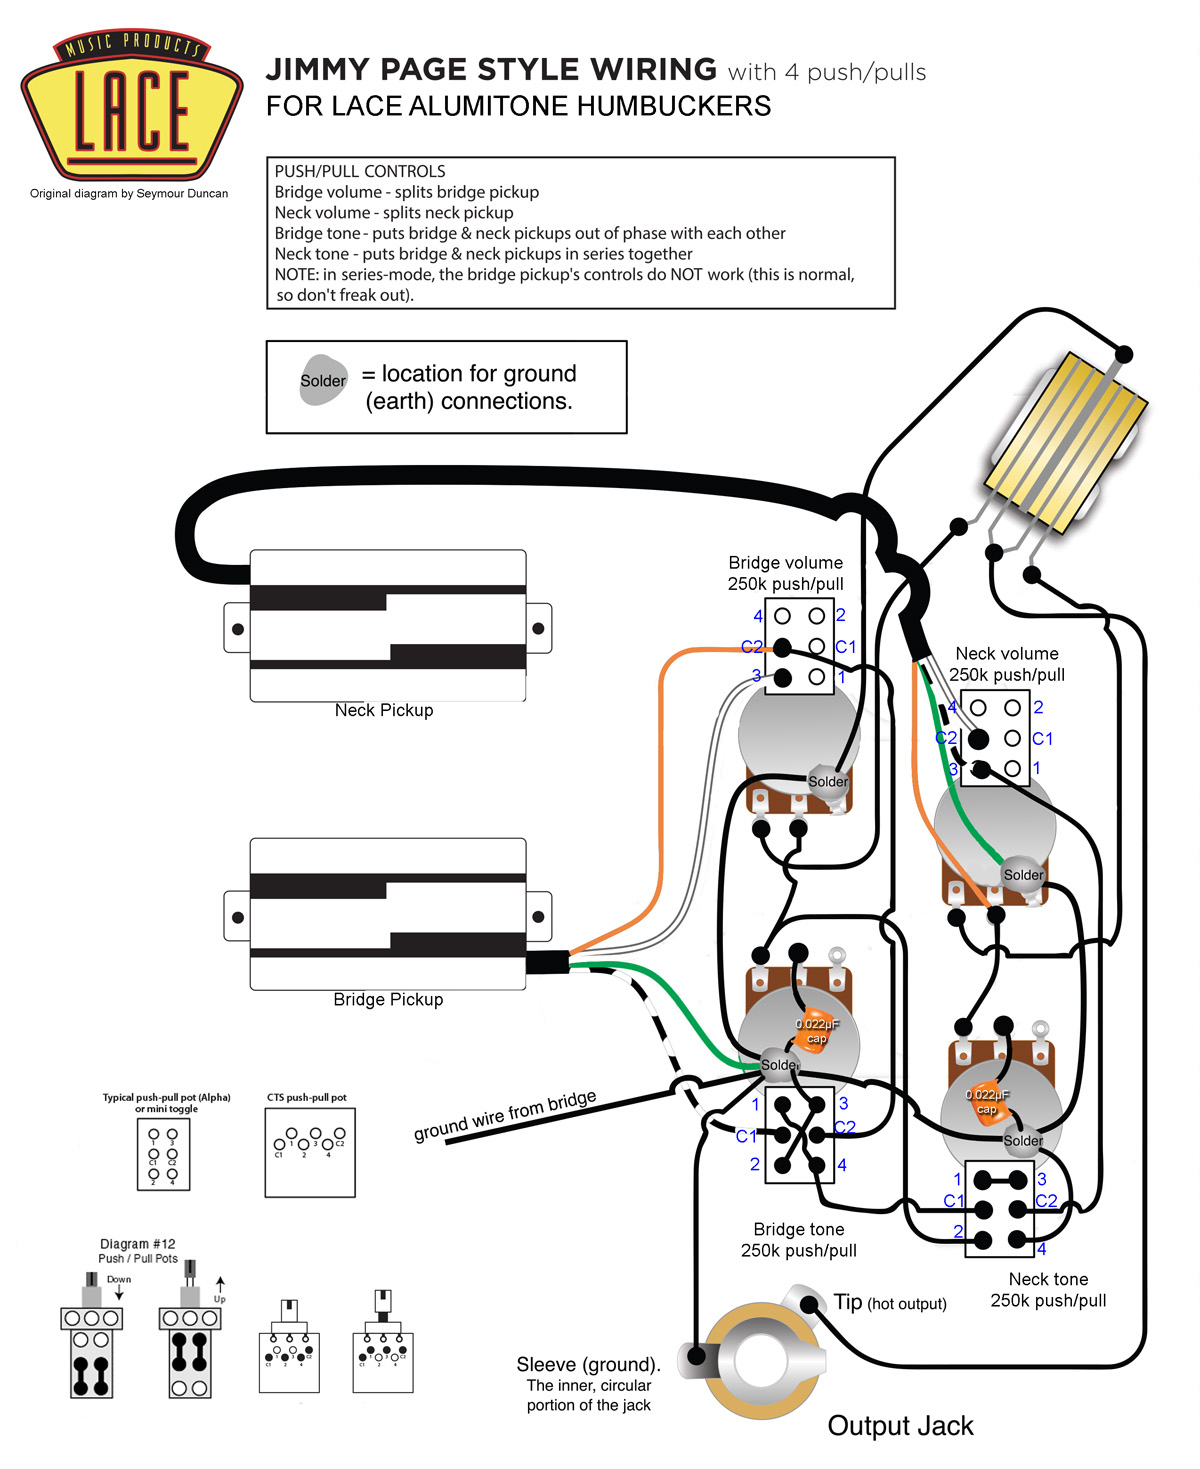 Jimmy Page Les Paul Wiring Diagram : Jimmy Page Les Paul Wiring Harness